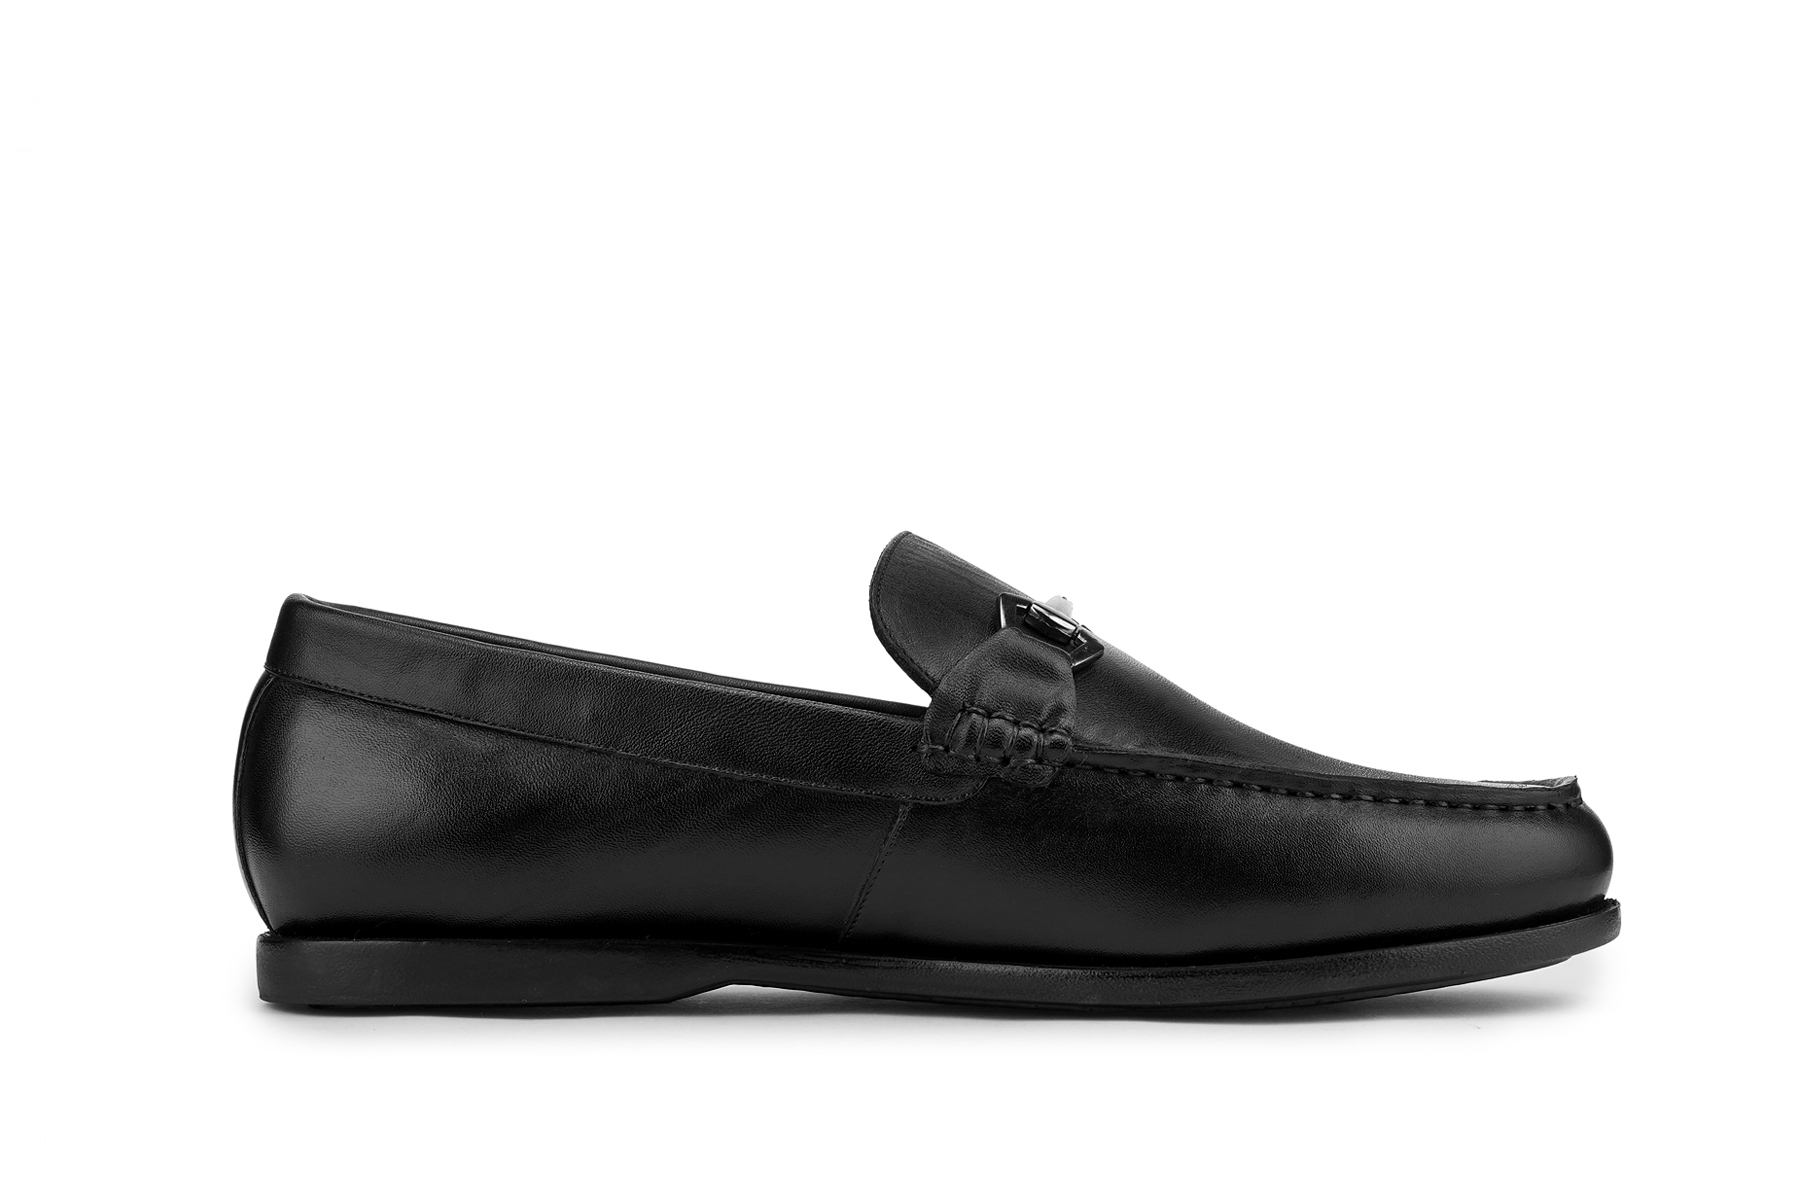 Pierre noir » Cordwainers - Cordwainers